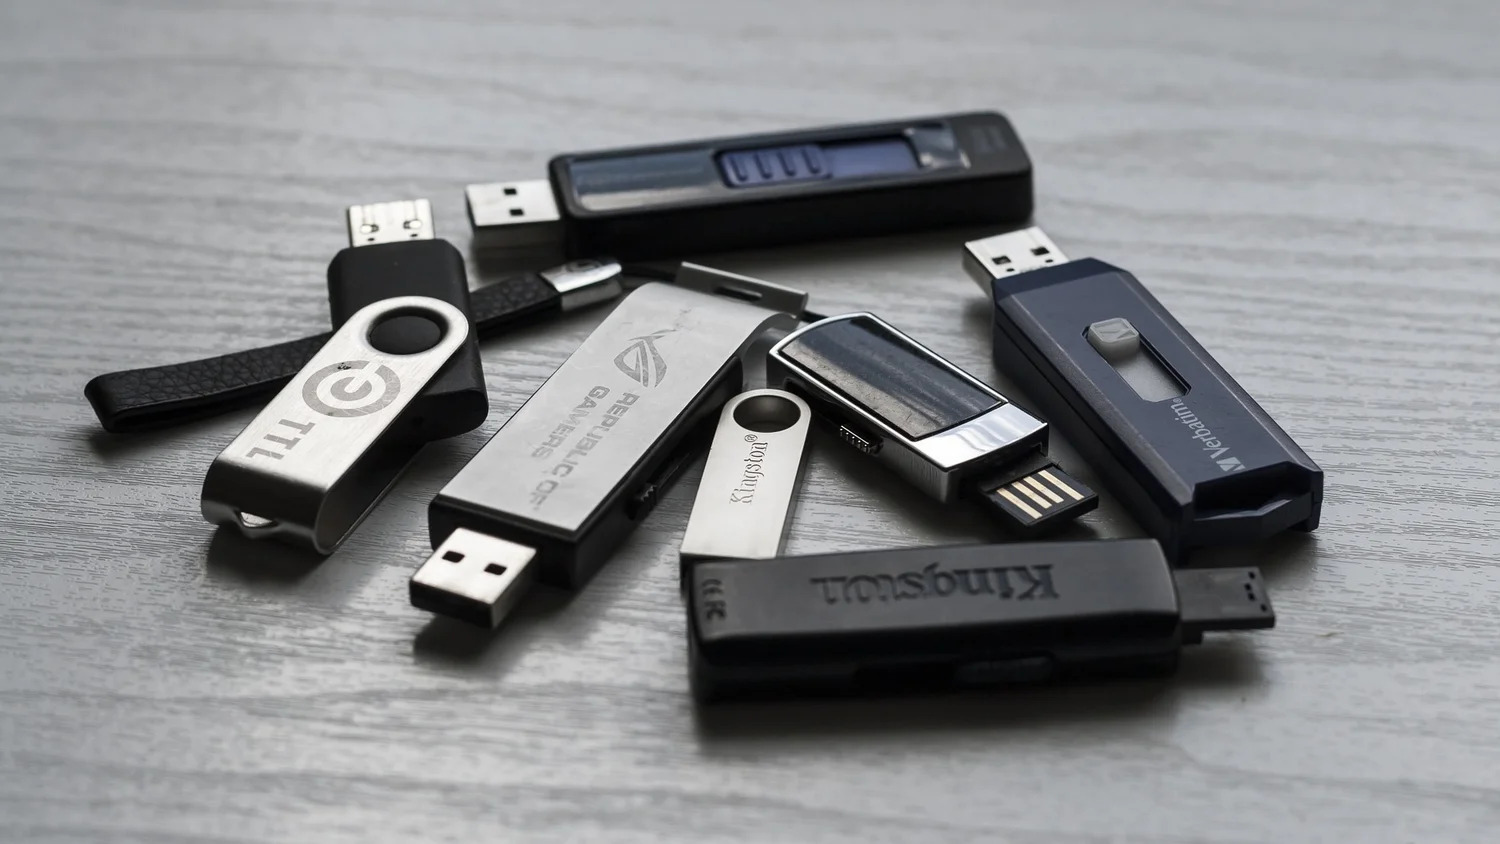 How To Store Flash Drives